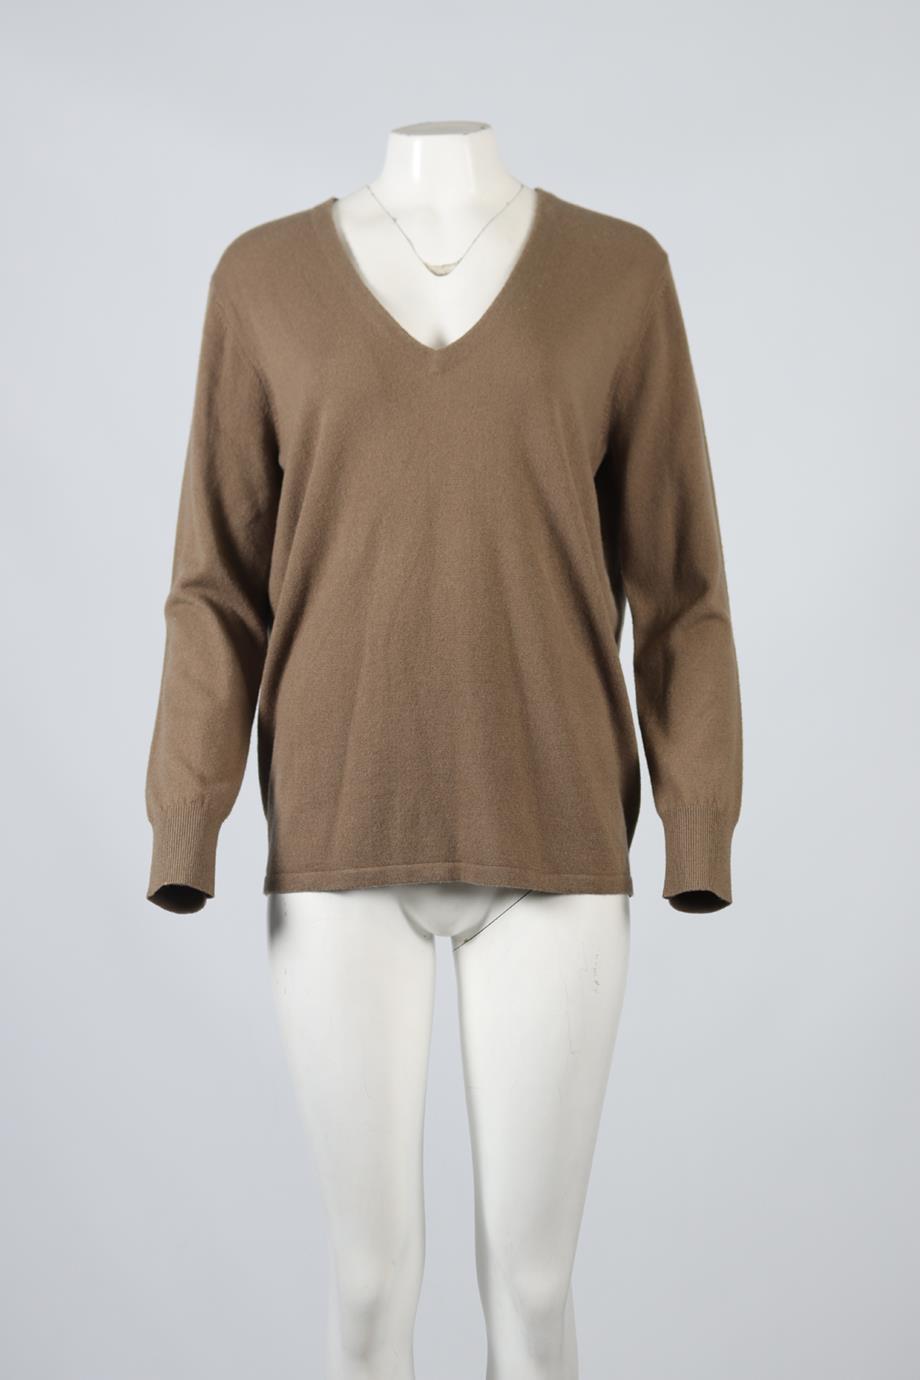 SOYER CASHMERE SWEATER LARGE